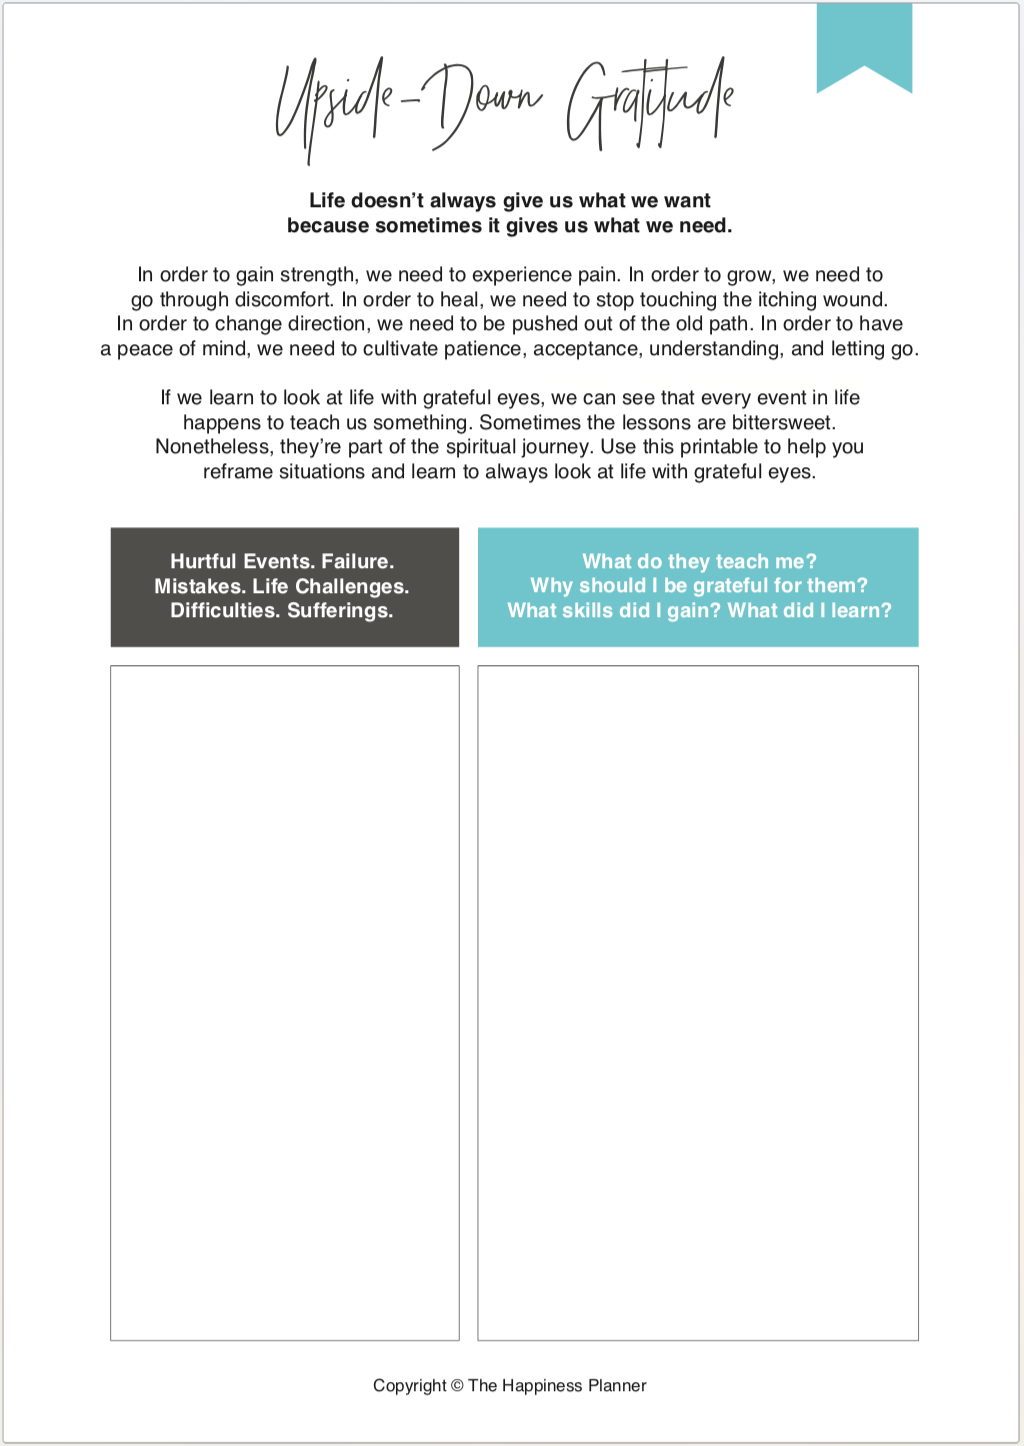 Printables: #Gratitude - The Happiness Planner®